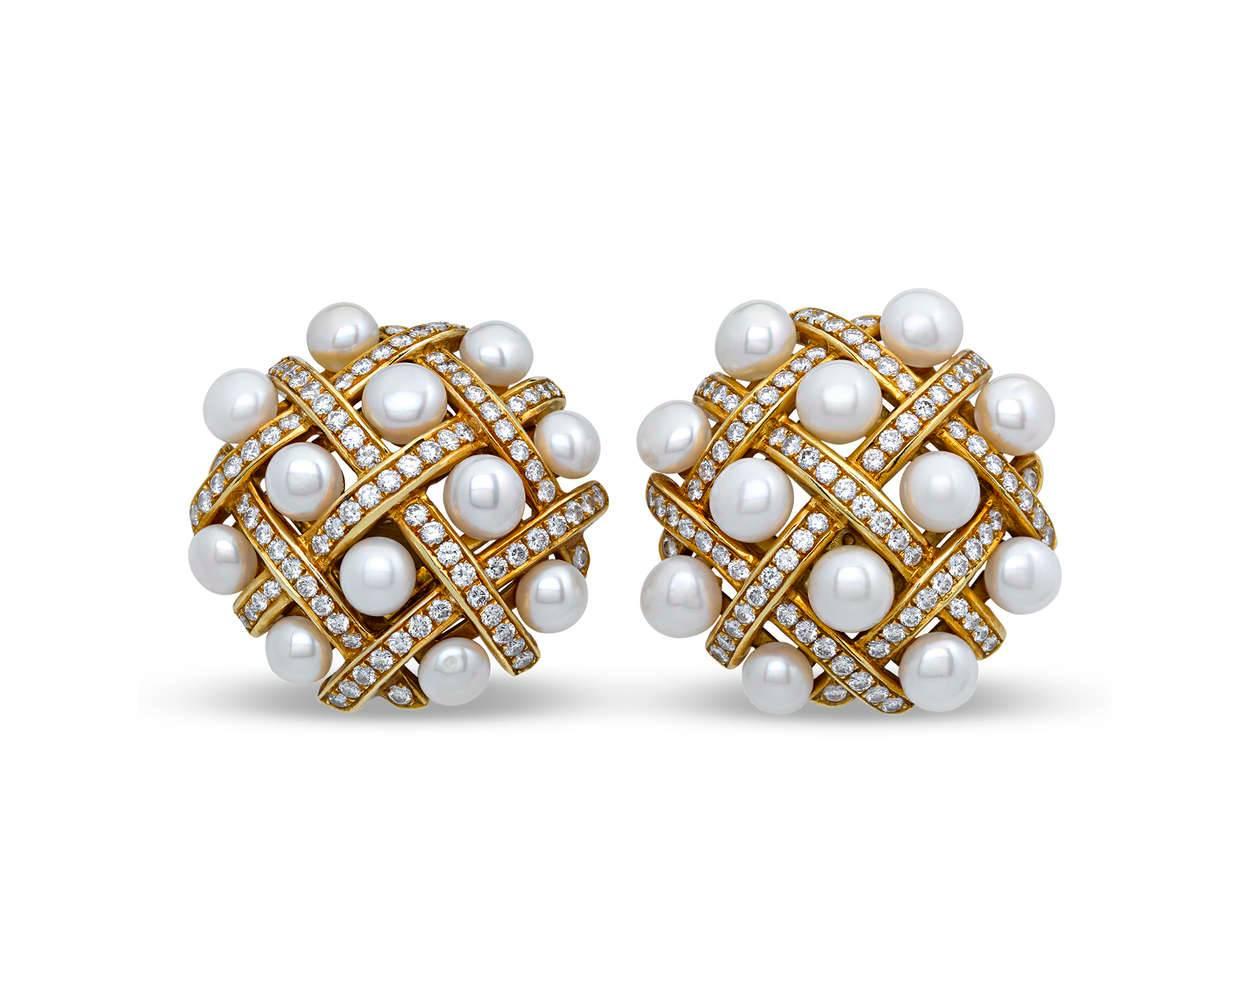 The epitome of haute couture elegance, these striking earrings are a symphony of diamonds and pearls. Crafted in a stunning latticework motif after a design by the legendary Chanel, the 18K gold interwoven strips sparkle with approximately 4.00